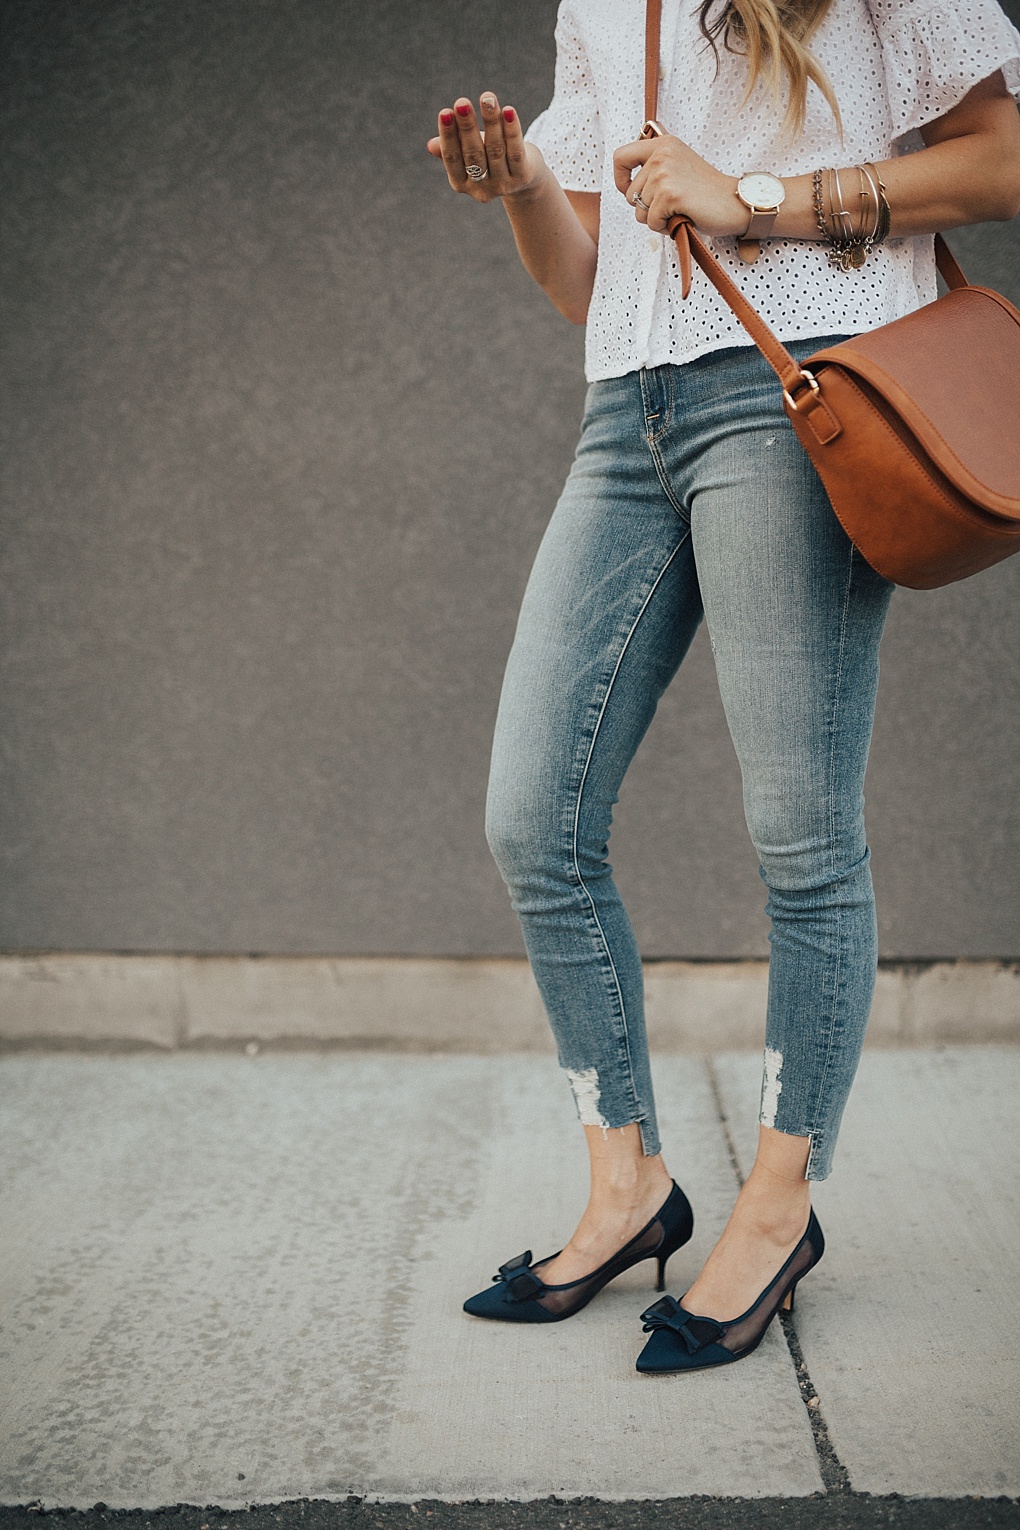 A Cute Eyelet Top To Dress Your Jeans Up by Utah fashion blogger Dani Marie